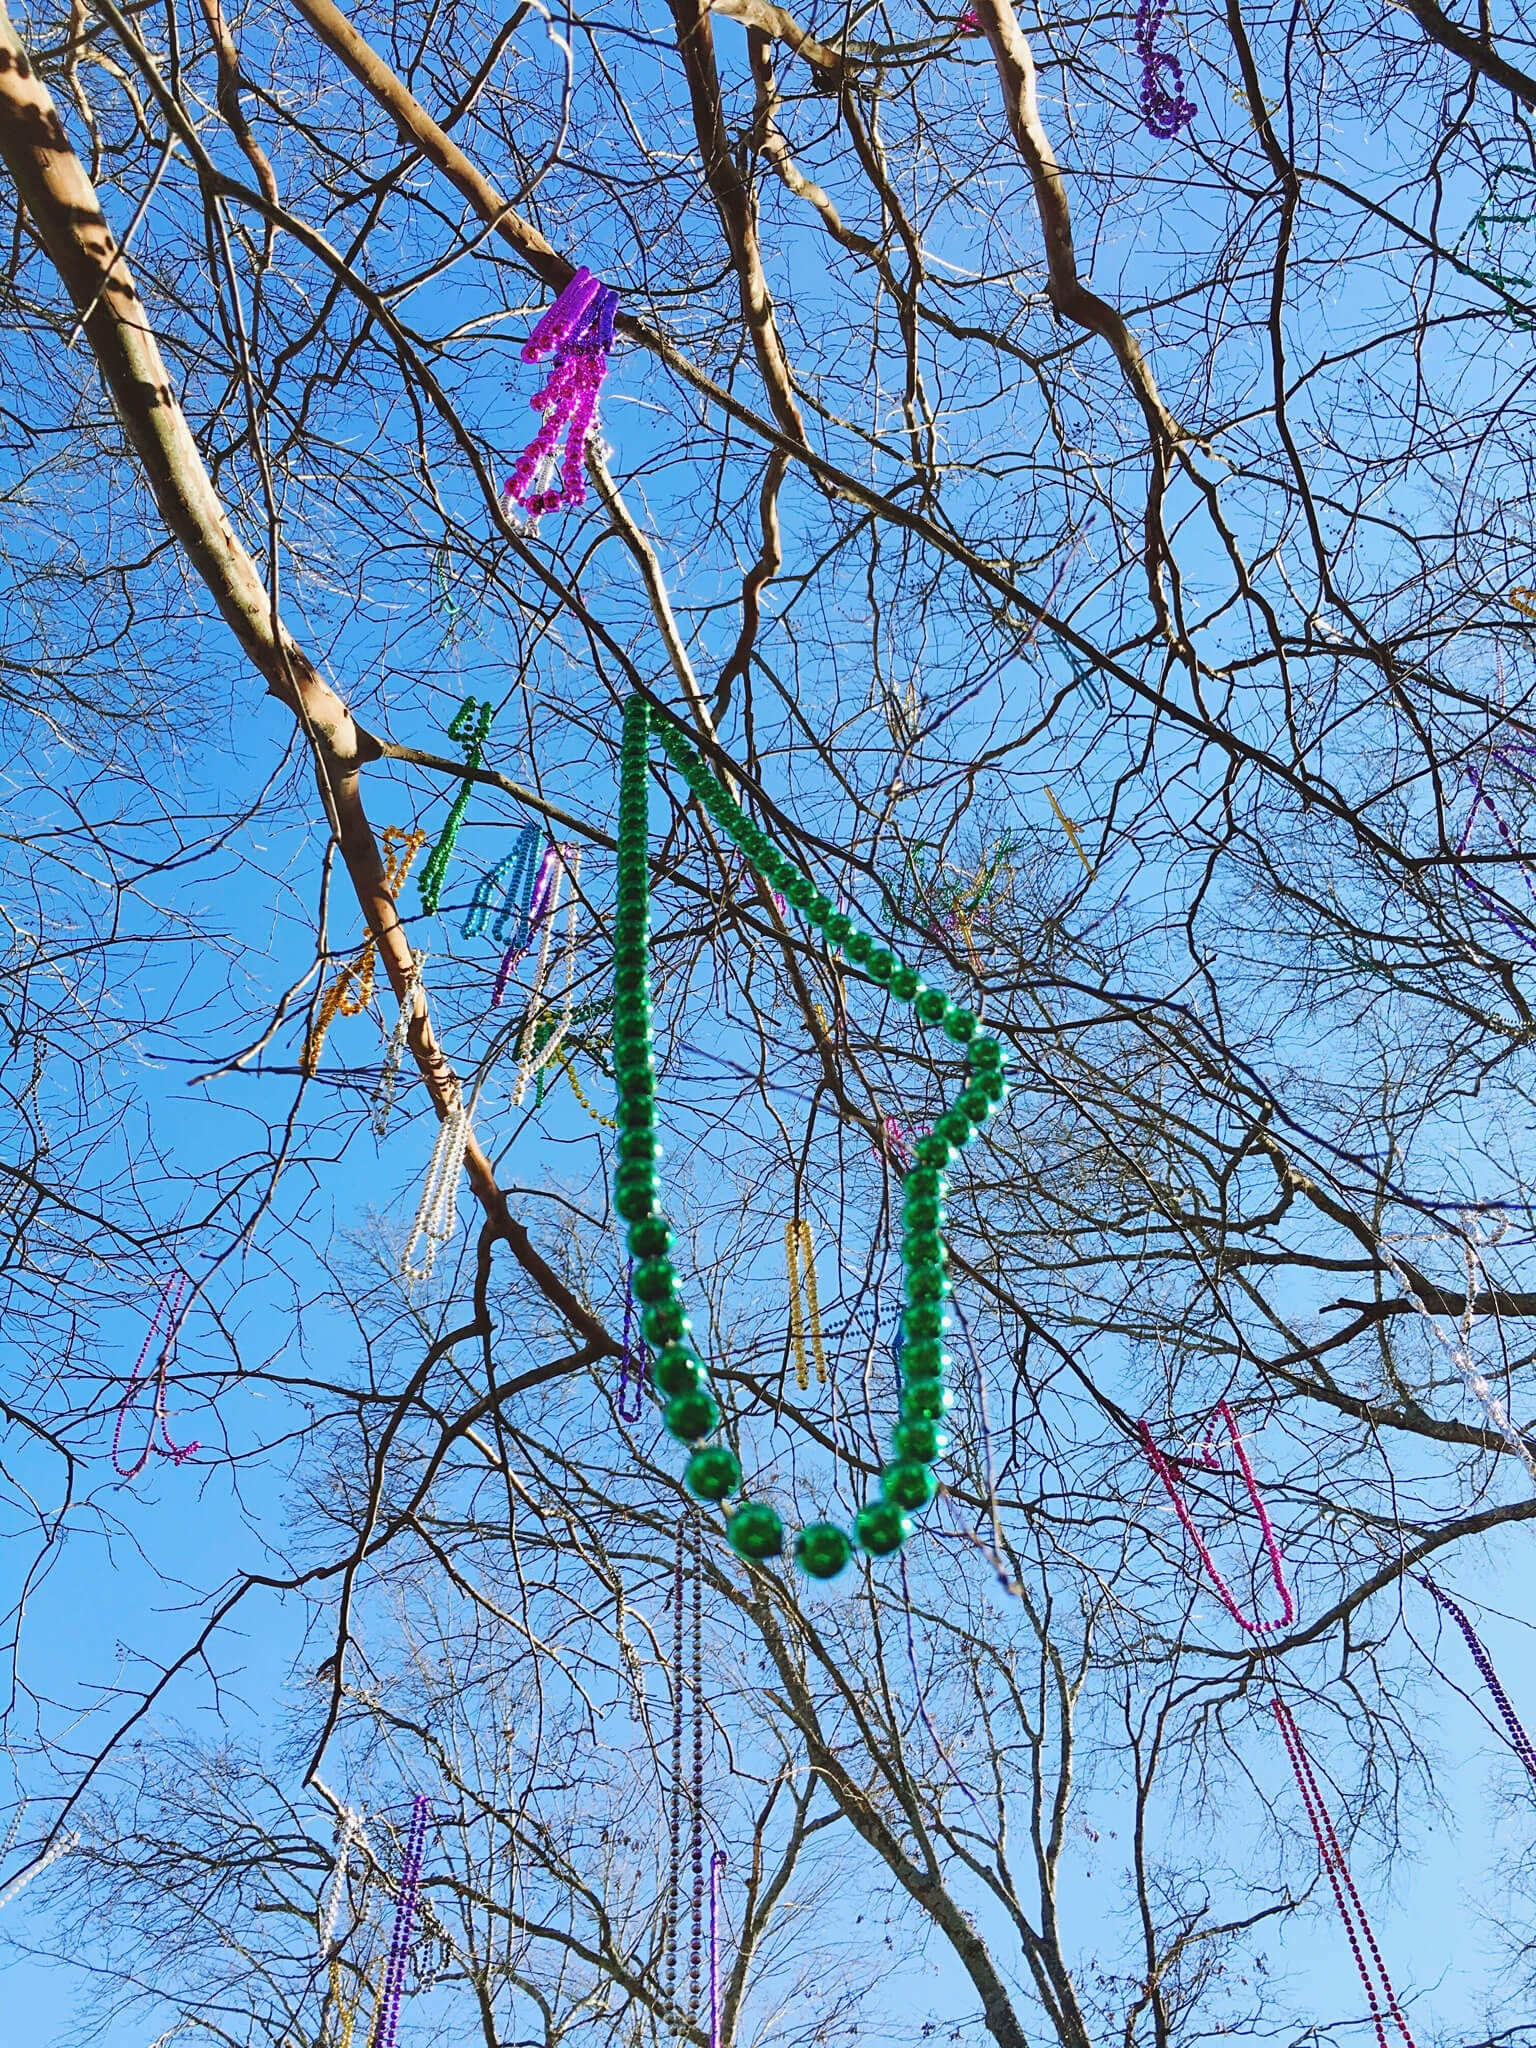 Low Angle View Of Mardi Gras Beads Hanging On Bare Trees